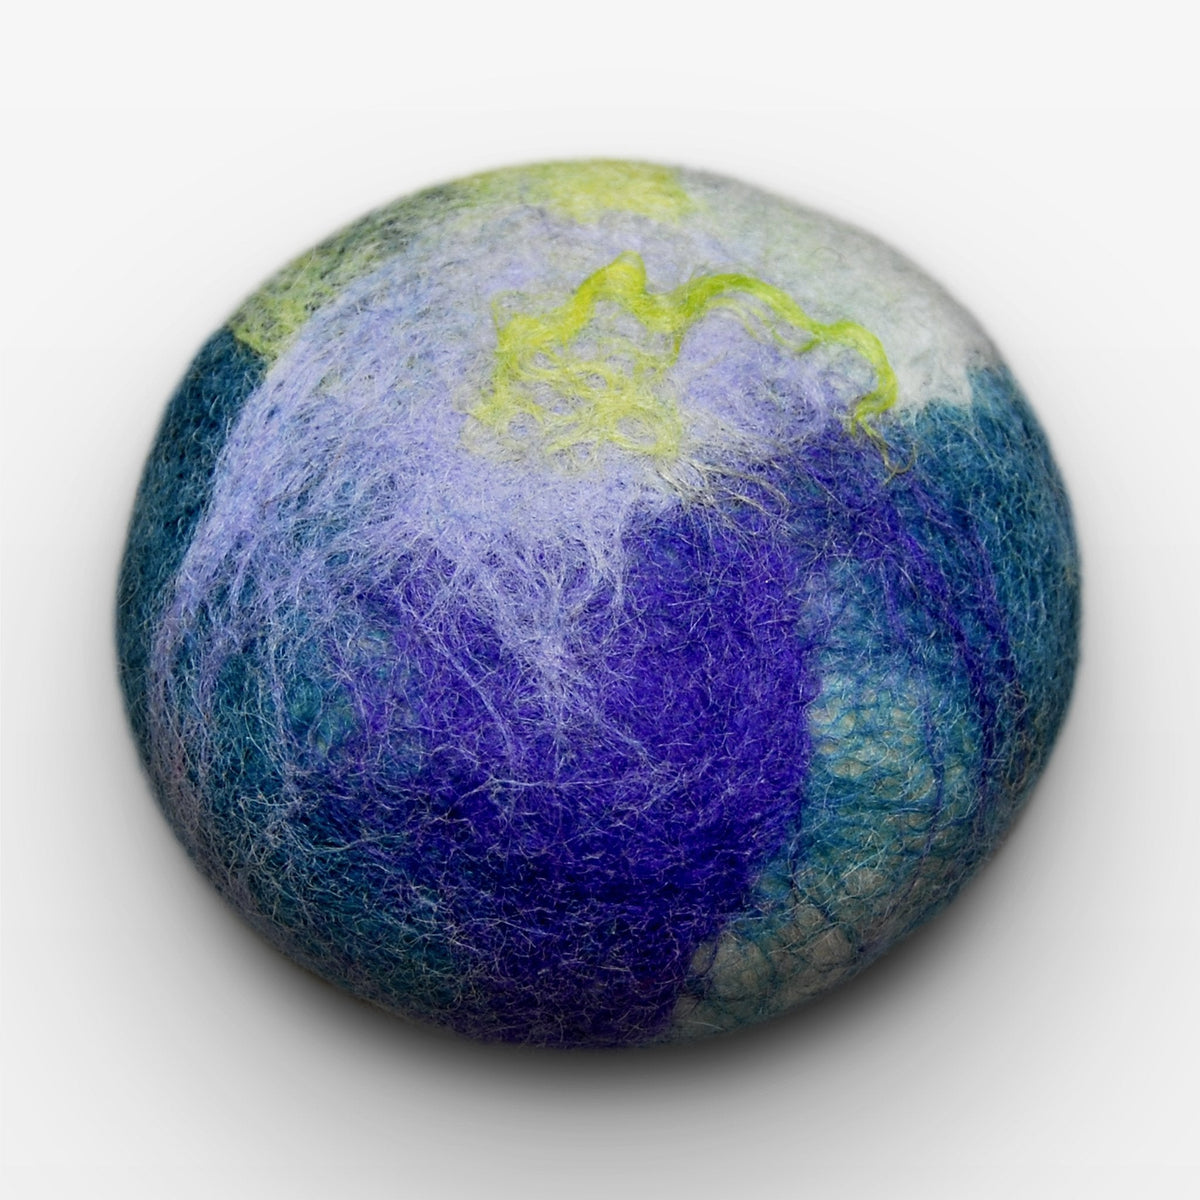 A round, textured object with a surface pattern resembling a Fiat Luxe - Classic Lavender Mint Felted Soap in shades of blue, green, purple, and yellow. The object is centered on a white background.